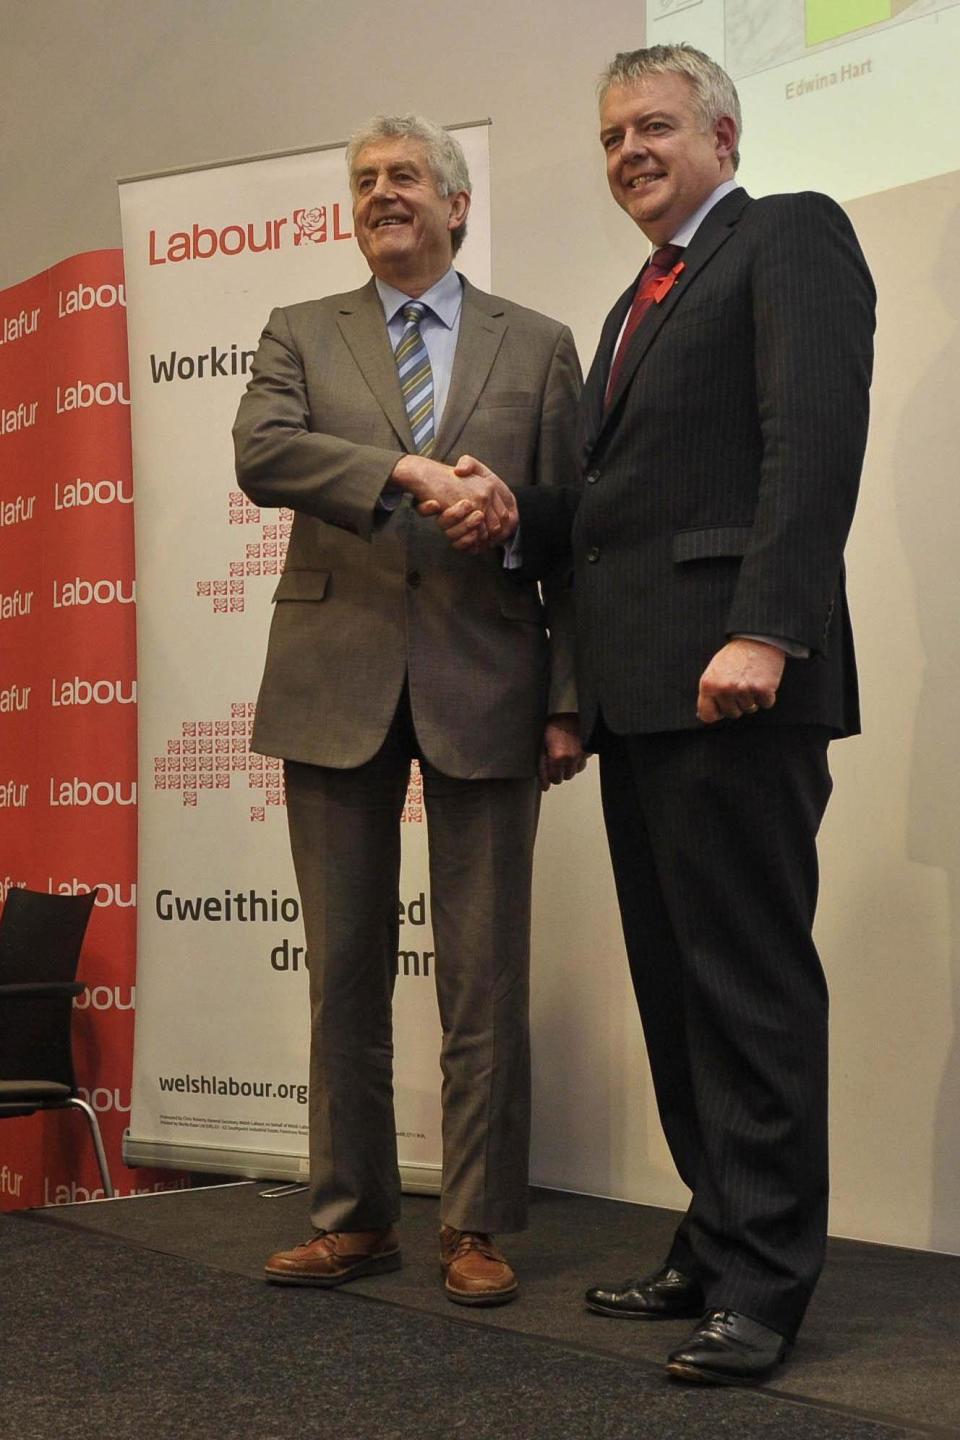 Carwyn Jones shaking hands with Rhodri Morgan, who he succeeded as Labour Party leader in Wales (PA)